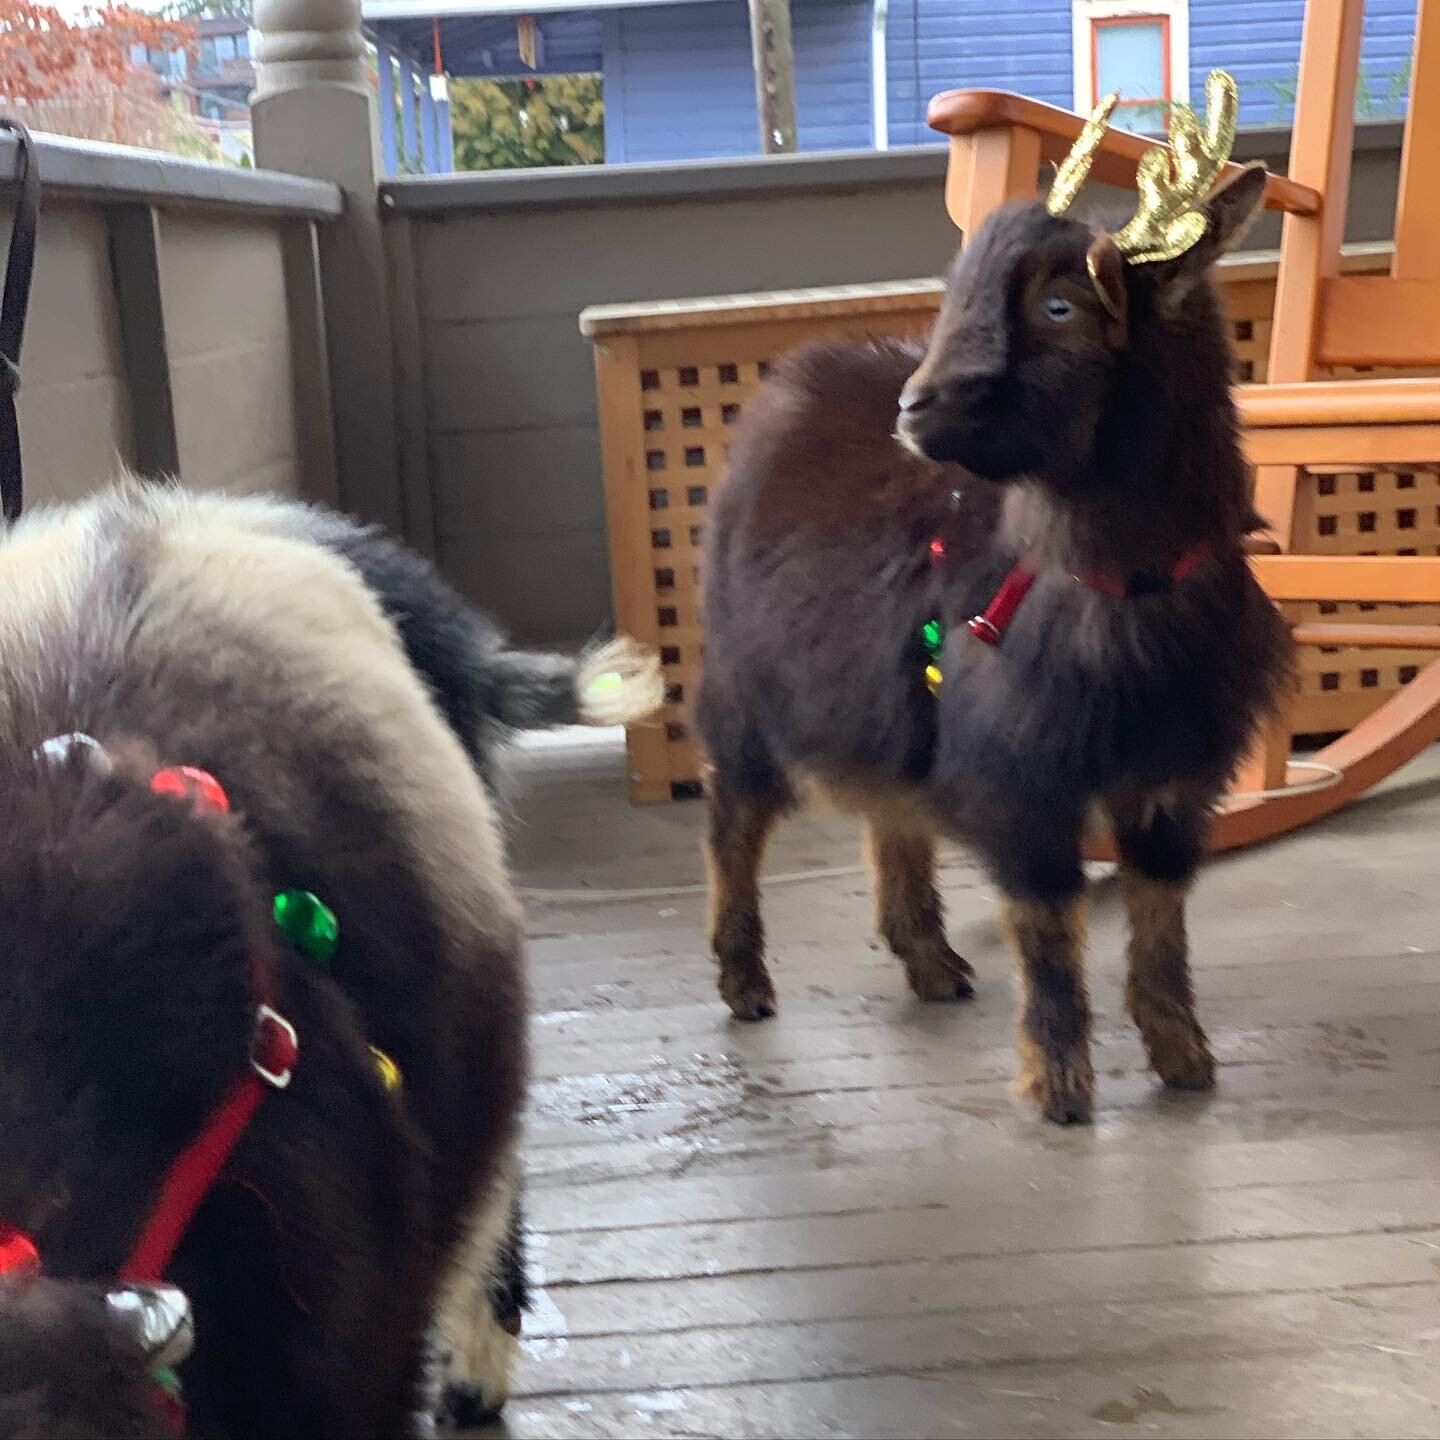 Sometimes in the midst of grief we do silly and wonderful things to warm our hearts. Thank you @portlandgoatparties for bringing some sweetness to us 🎄✨❤️ #babyreindeergoats #petermadetheharnesseshimself #hearthealing